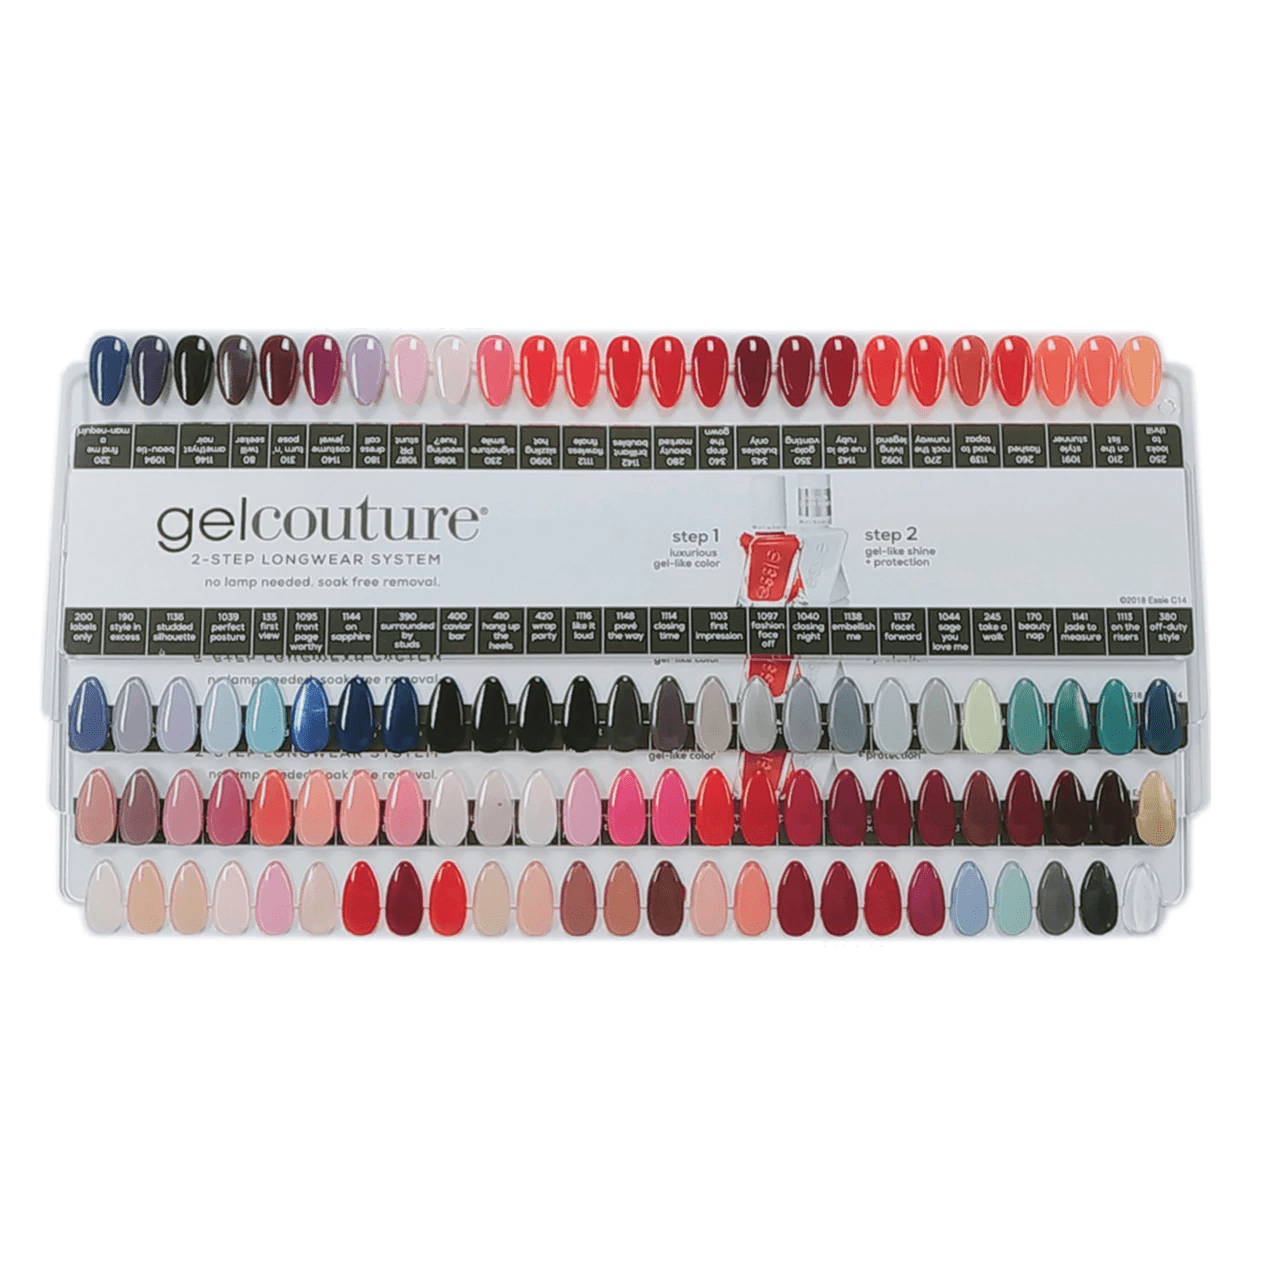 ES Gel Couture Nail Plank Color Chart Sample Swatch 139 colors ...